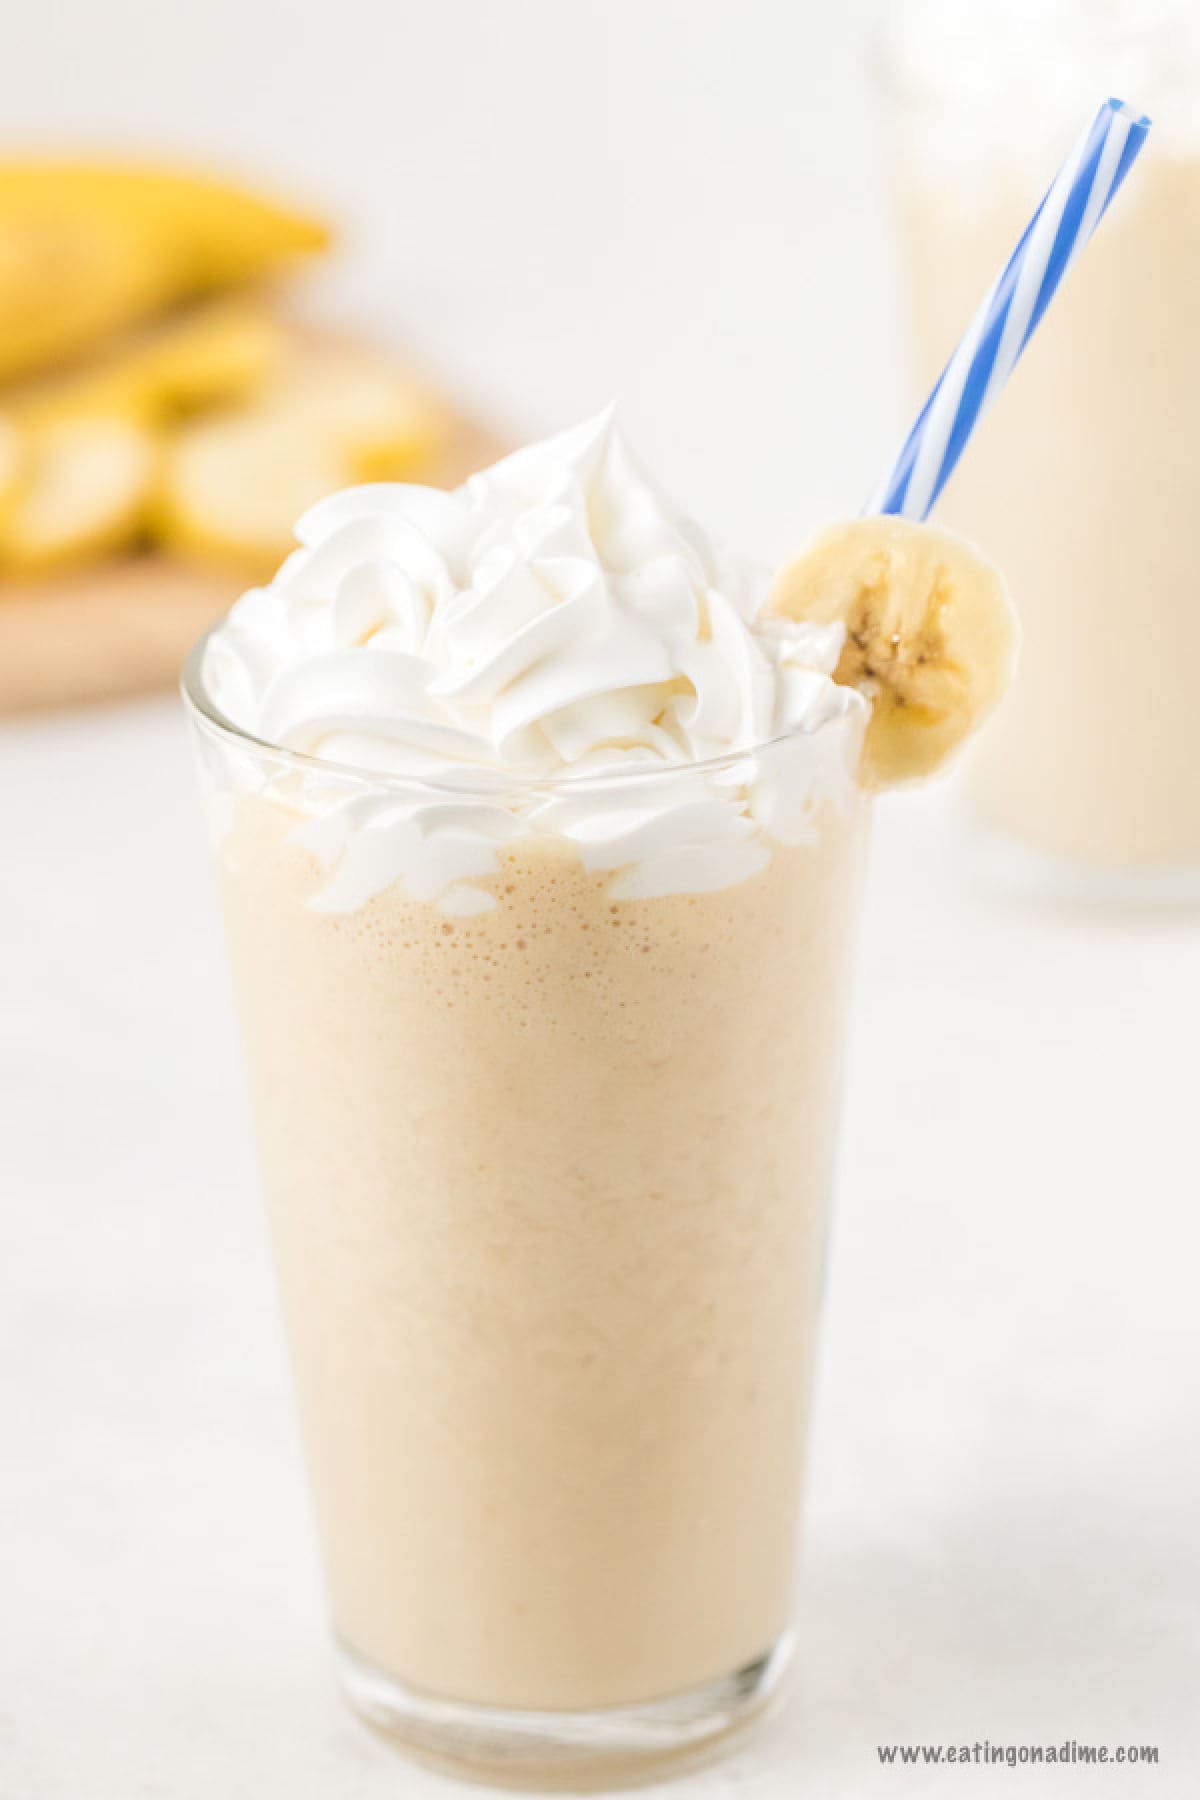 Peanut butter banana smoothie in a glass topped with a banana slice and whipped cream with a blue and white straw